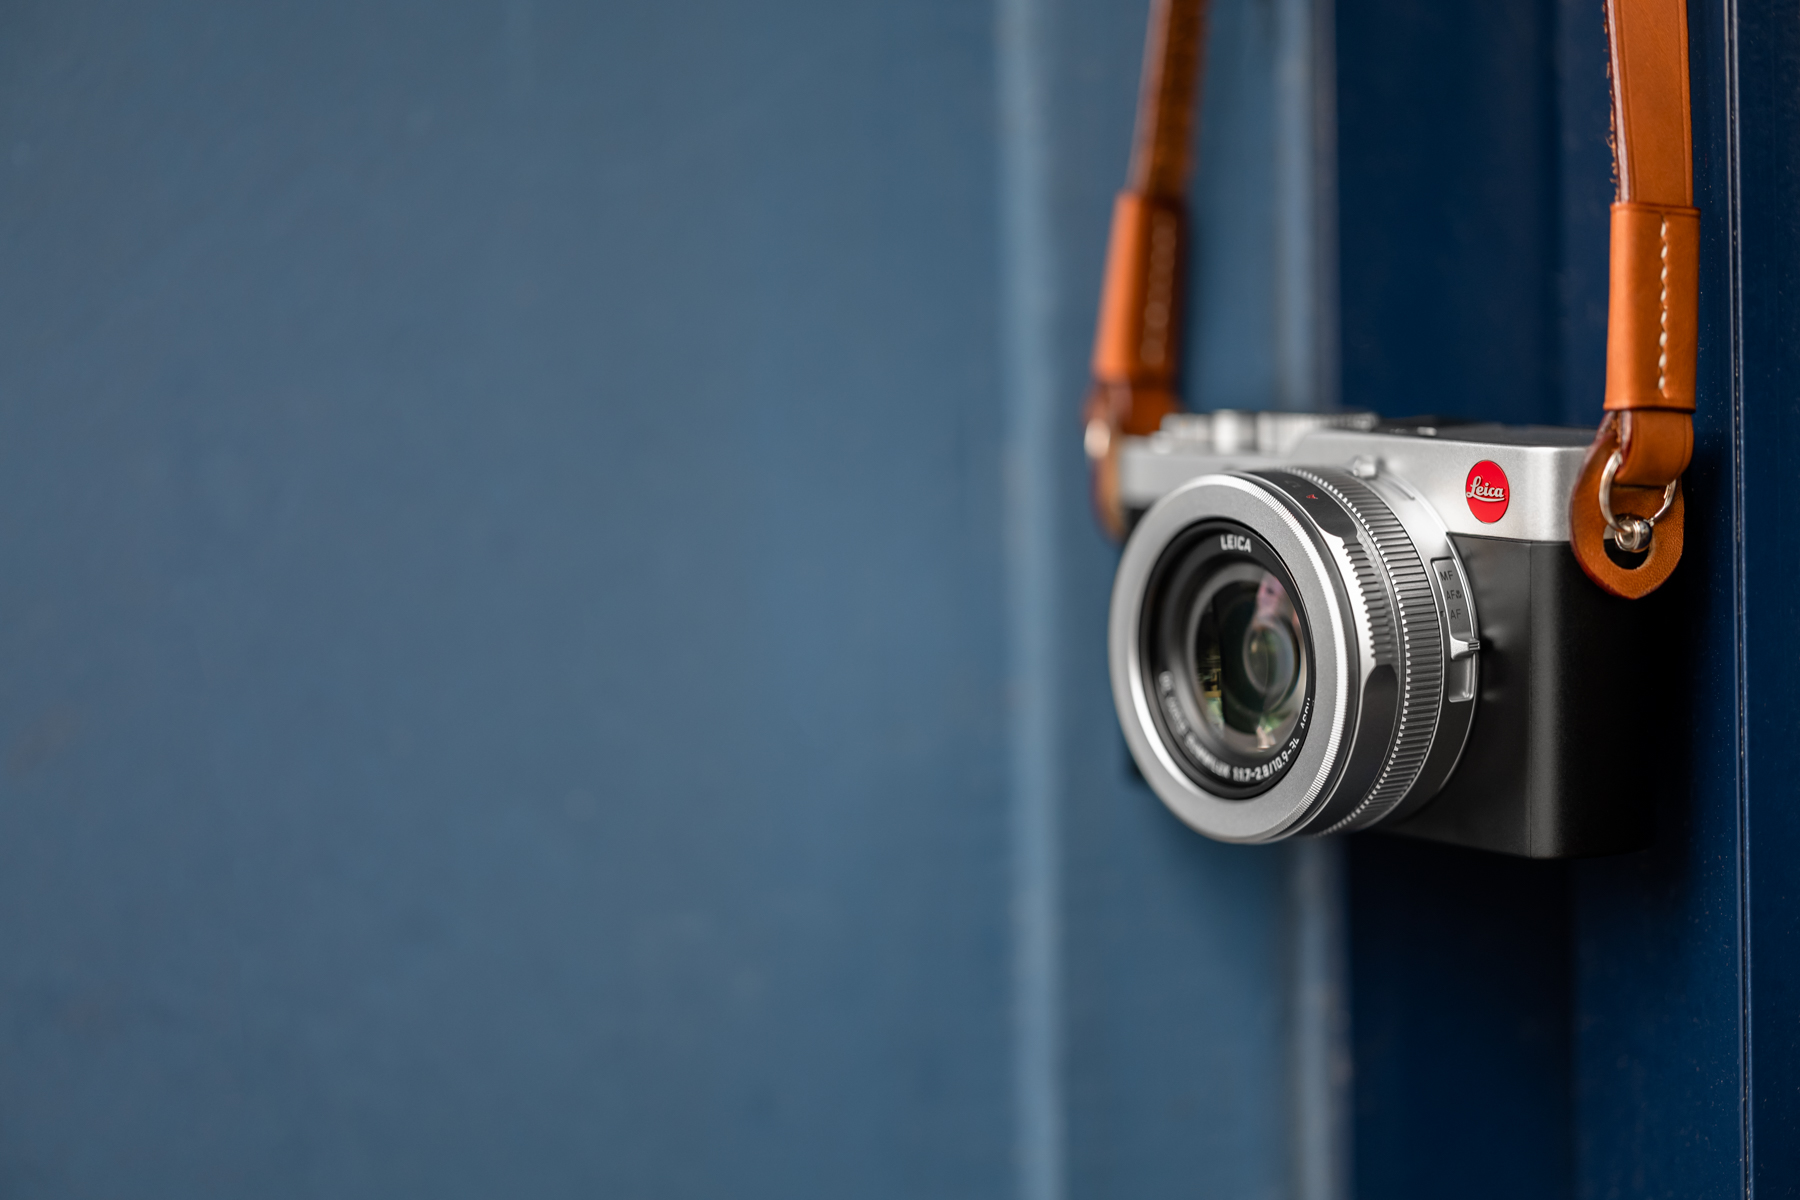 Leica D-Lux 7 Compact Camera Released | Red Dot Forum